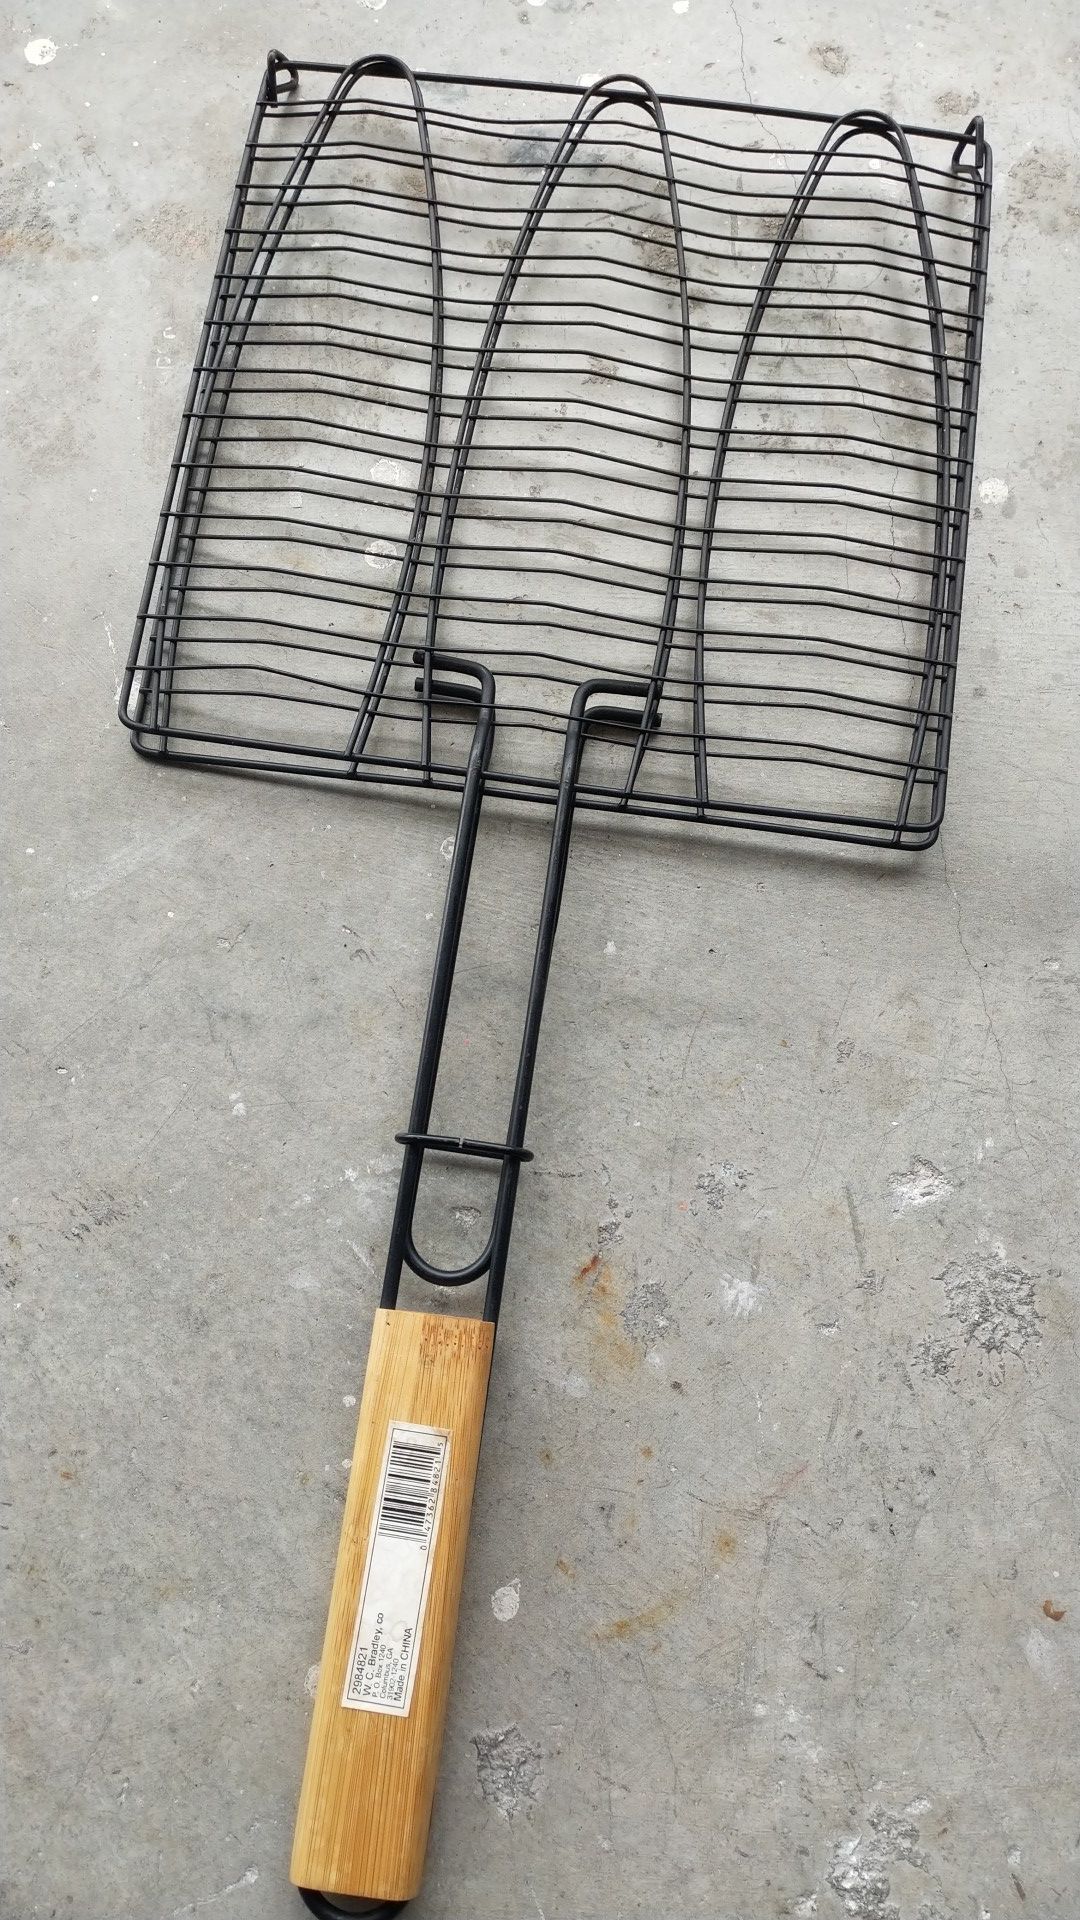 BBQ grilling cage/grate to cook fish & vegetables, New